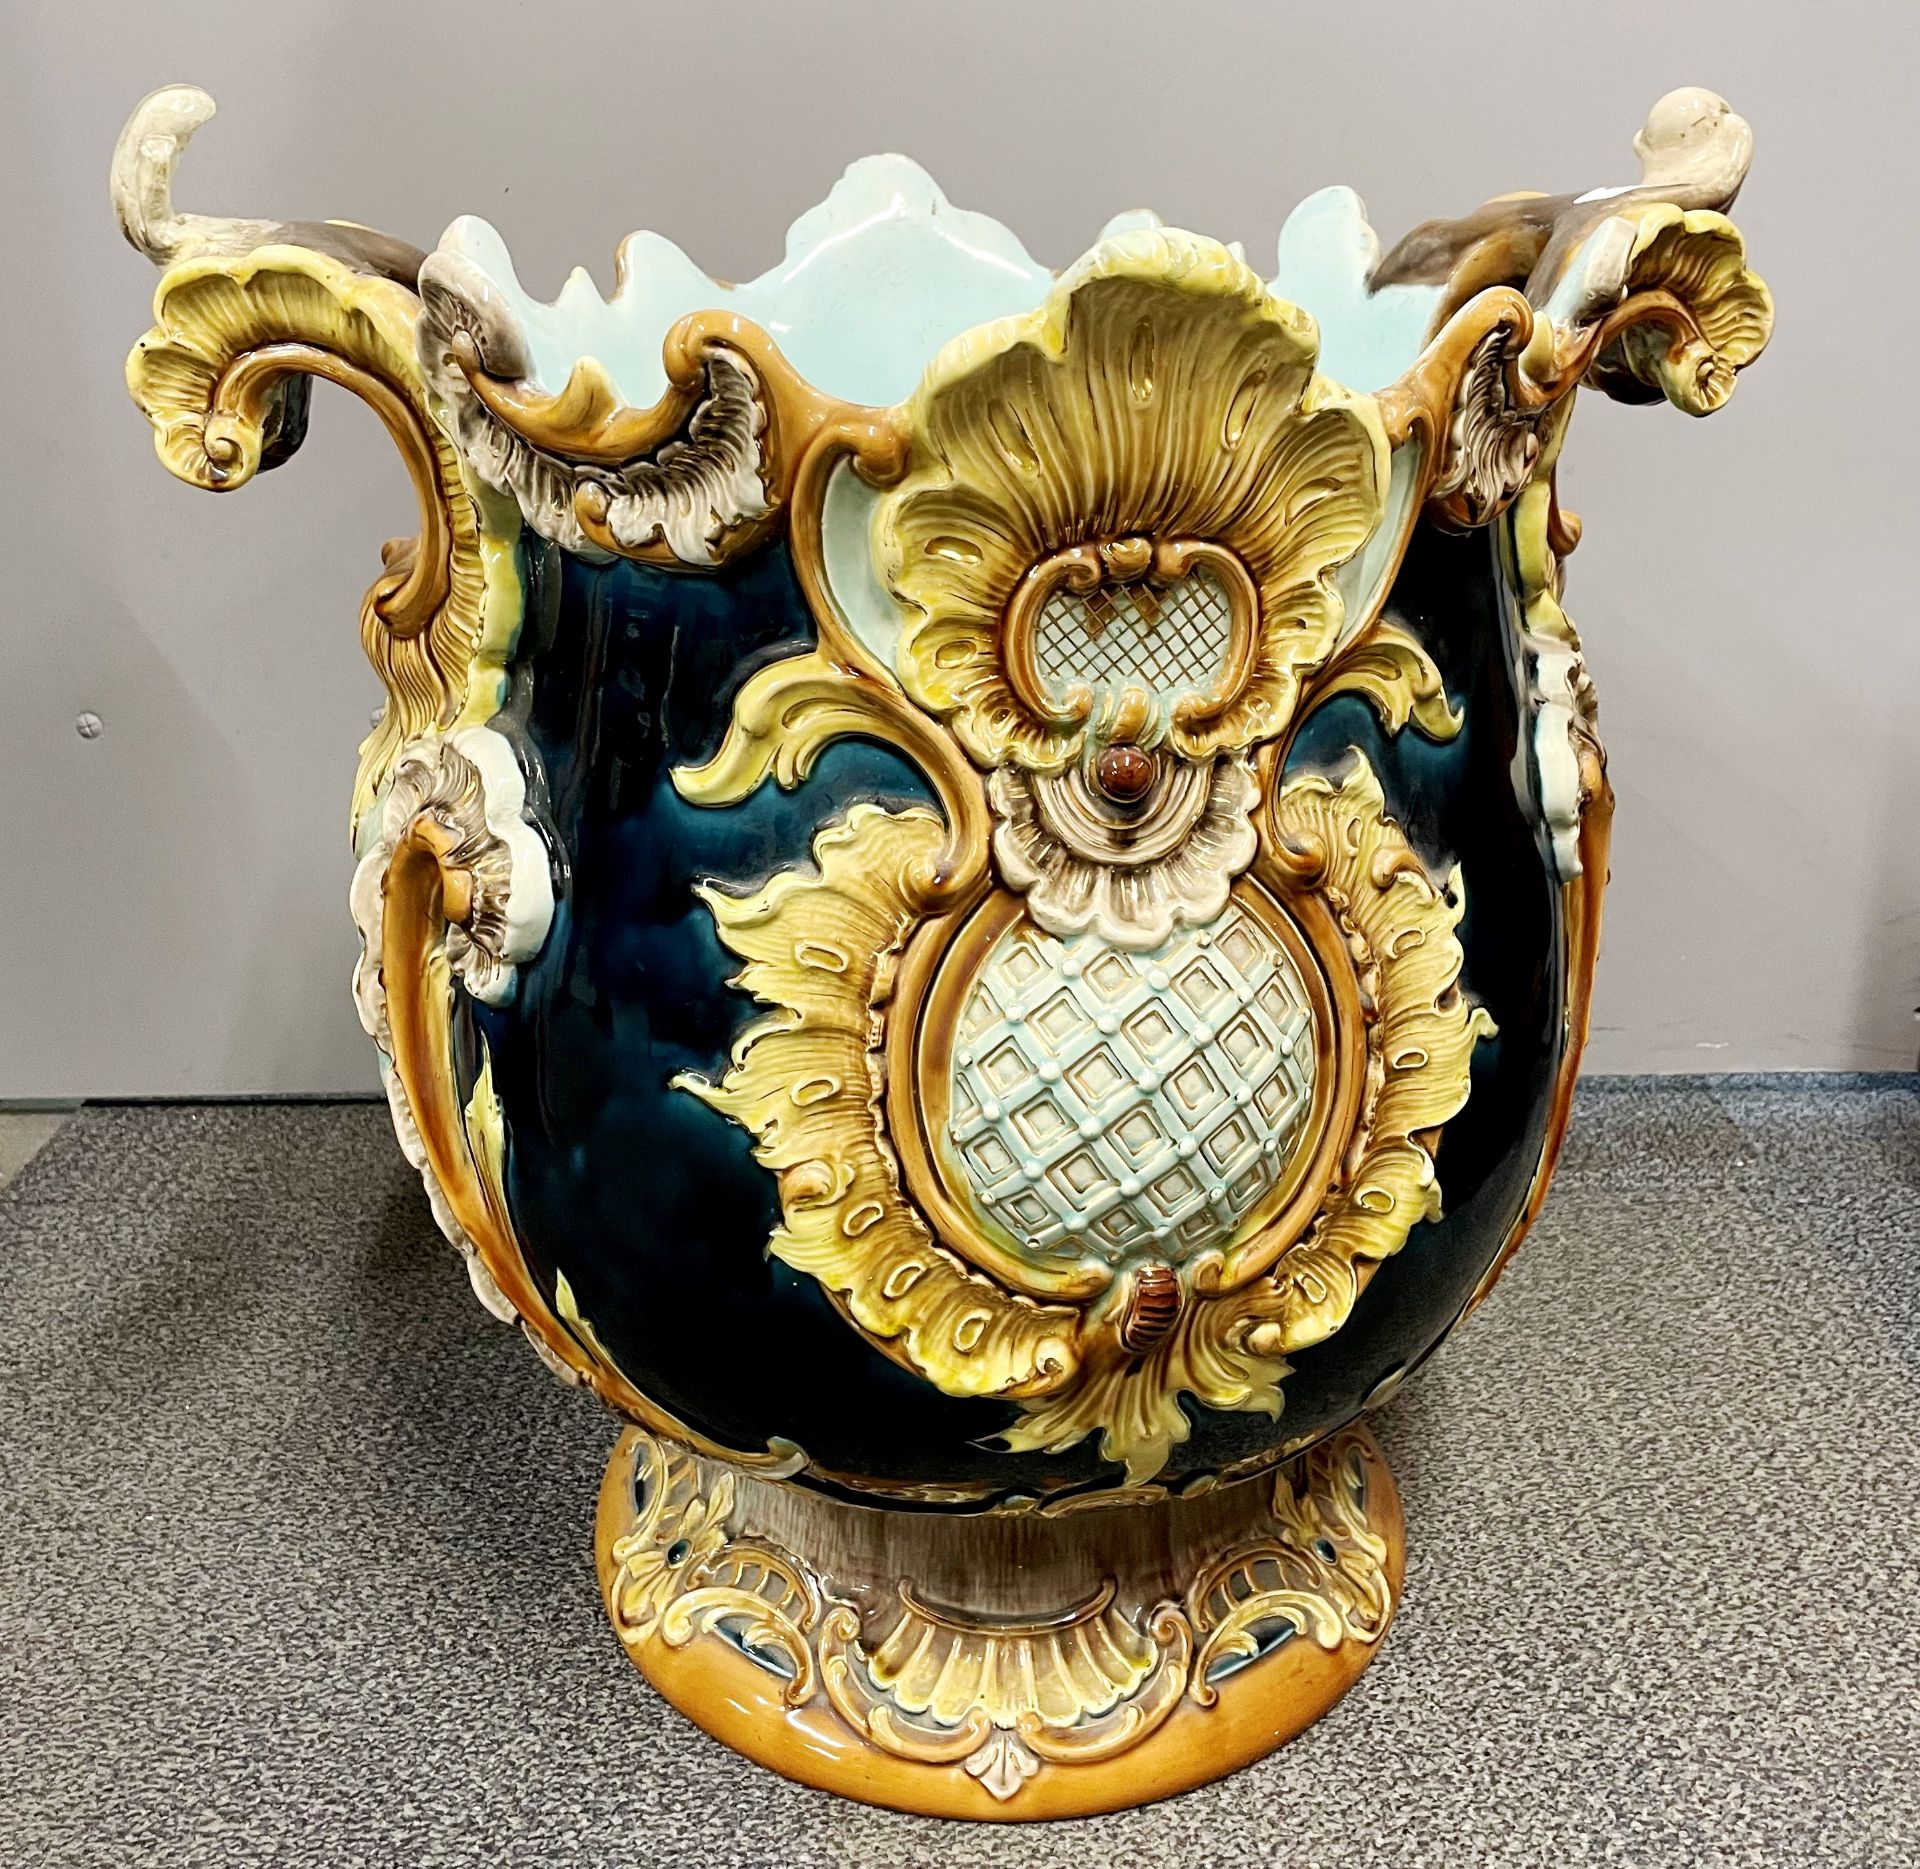 A superb large 19thC majolica style planter, probably Minton, with some cracking to base and